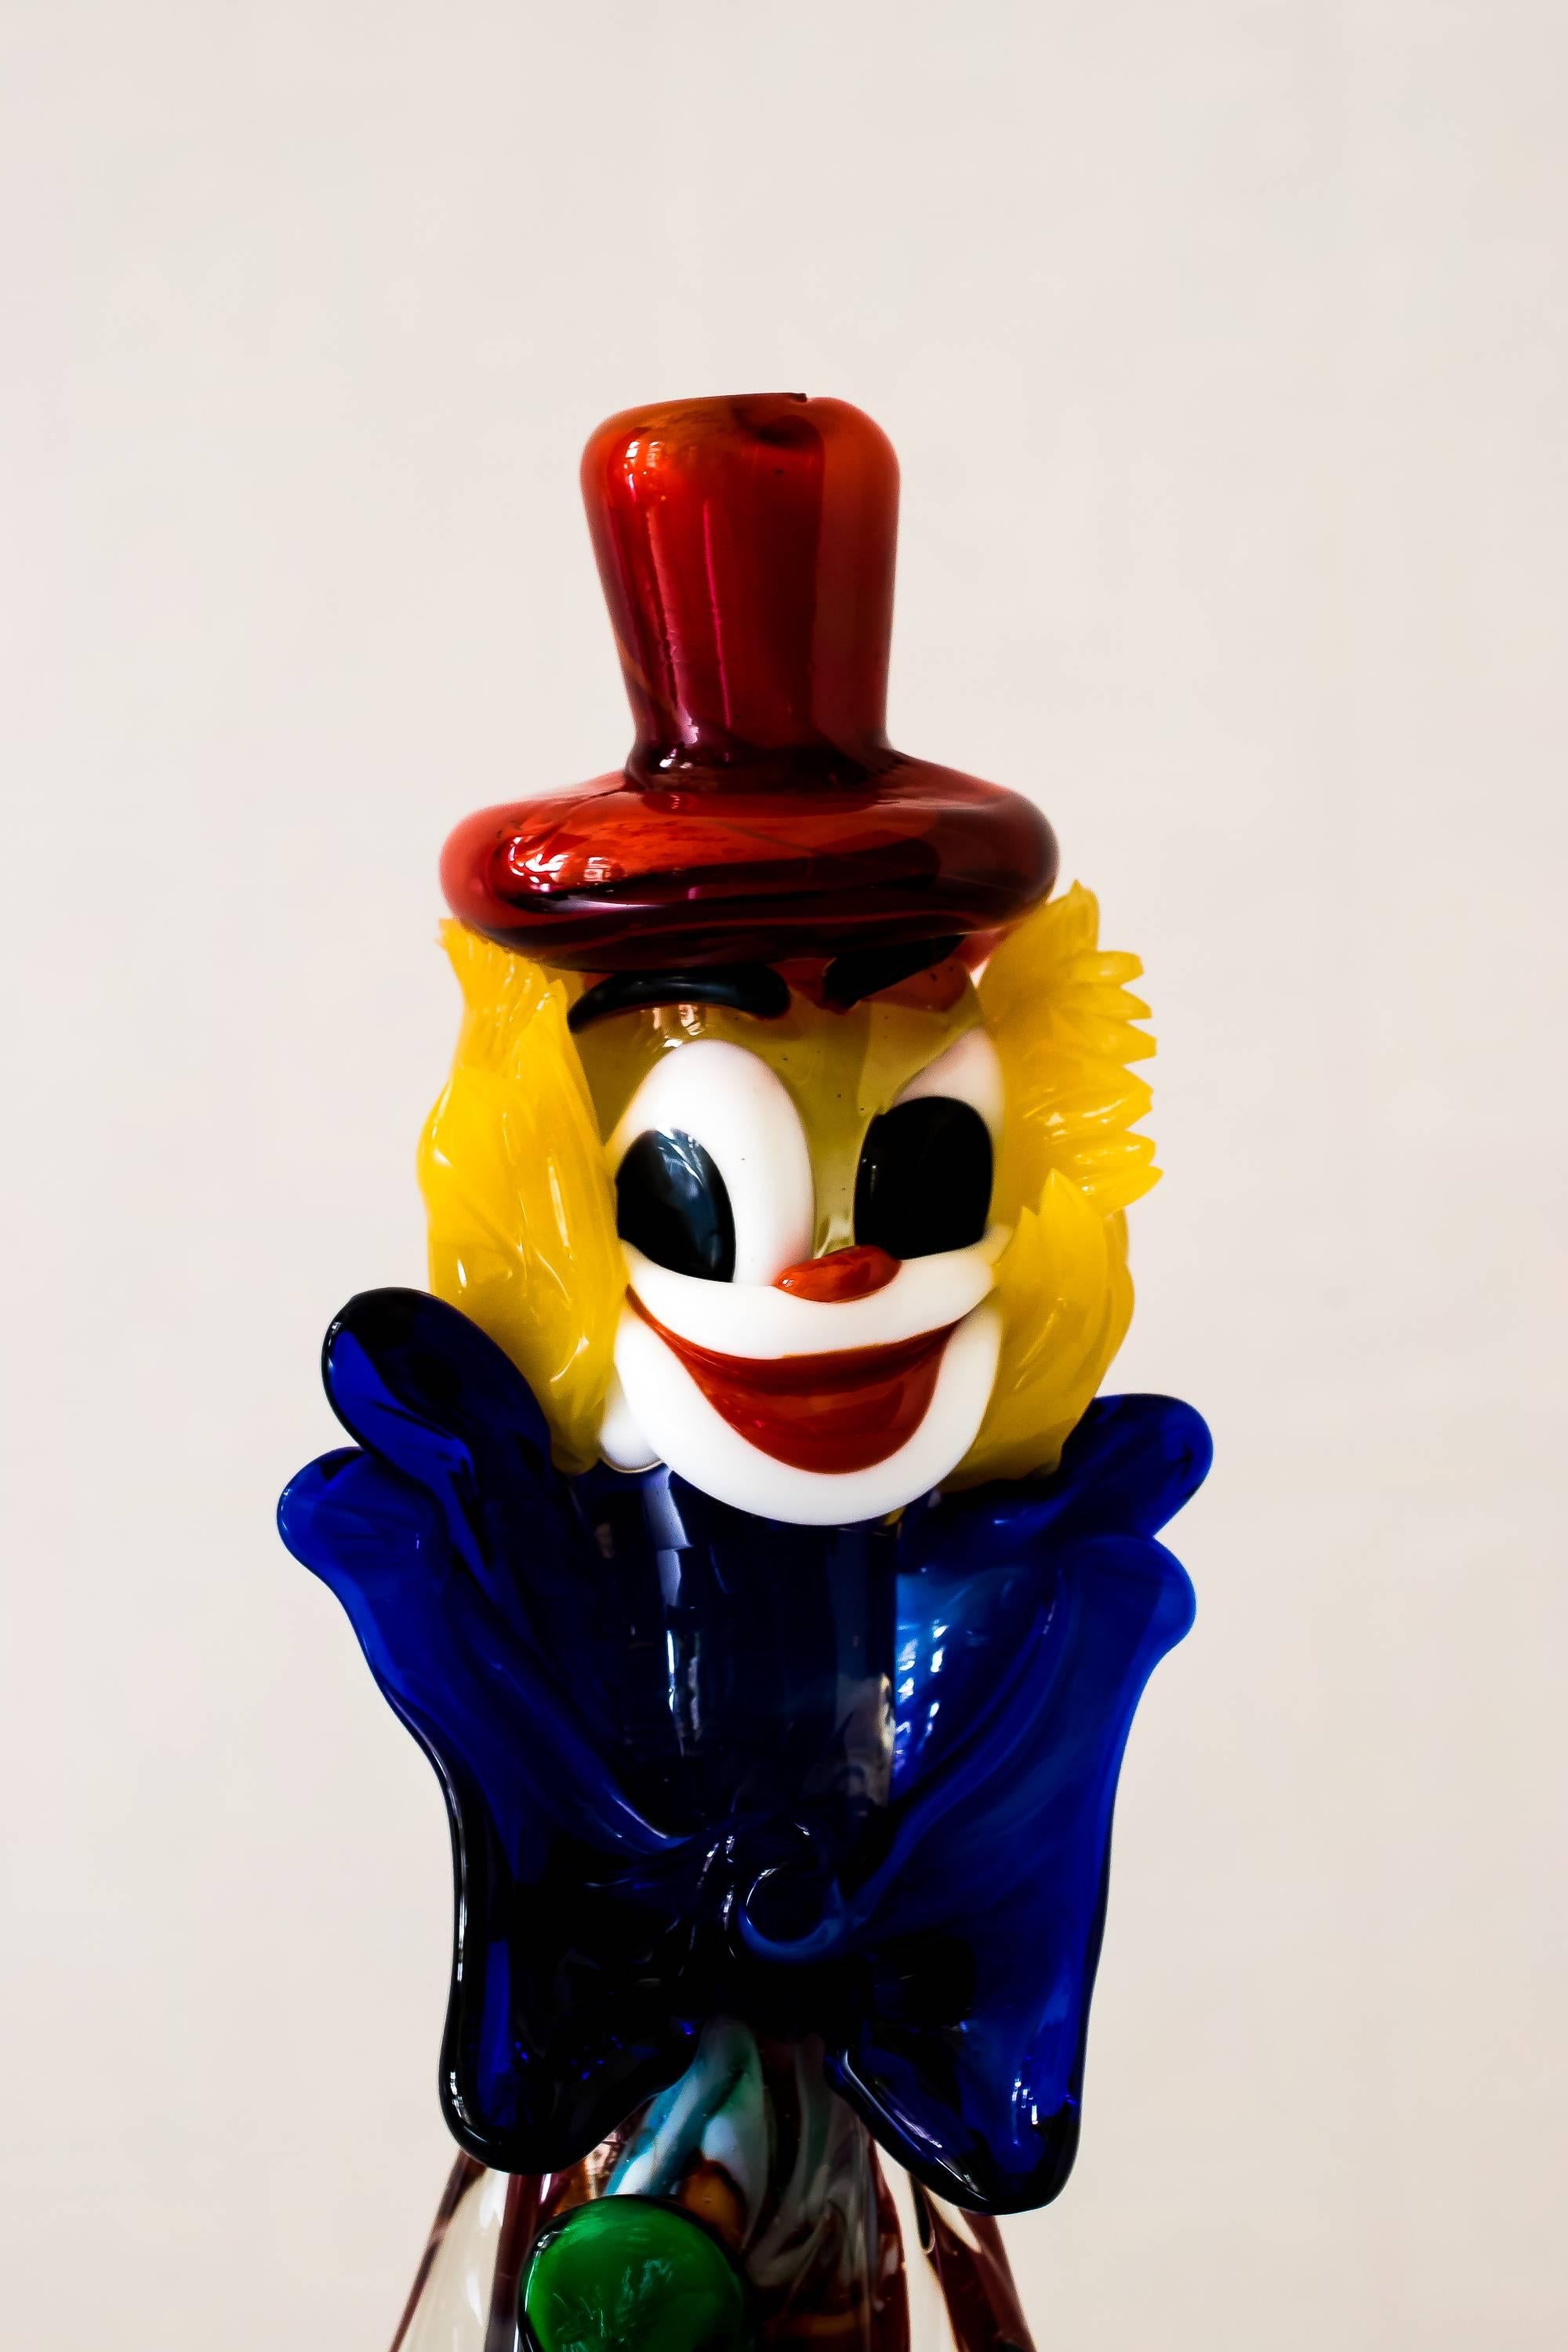 The glass clown was designed and manufactured in the Mid-Century Modern era in Murano, Italy.
Original condition.